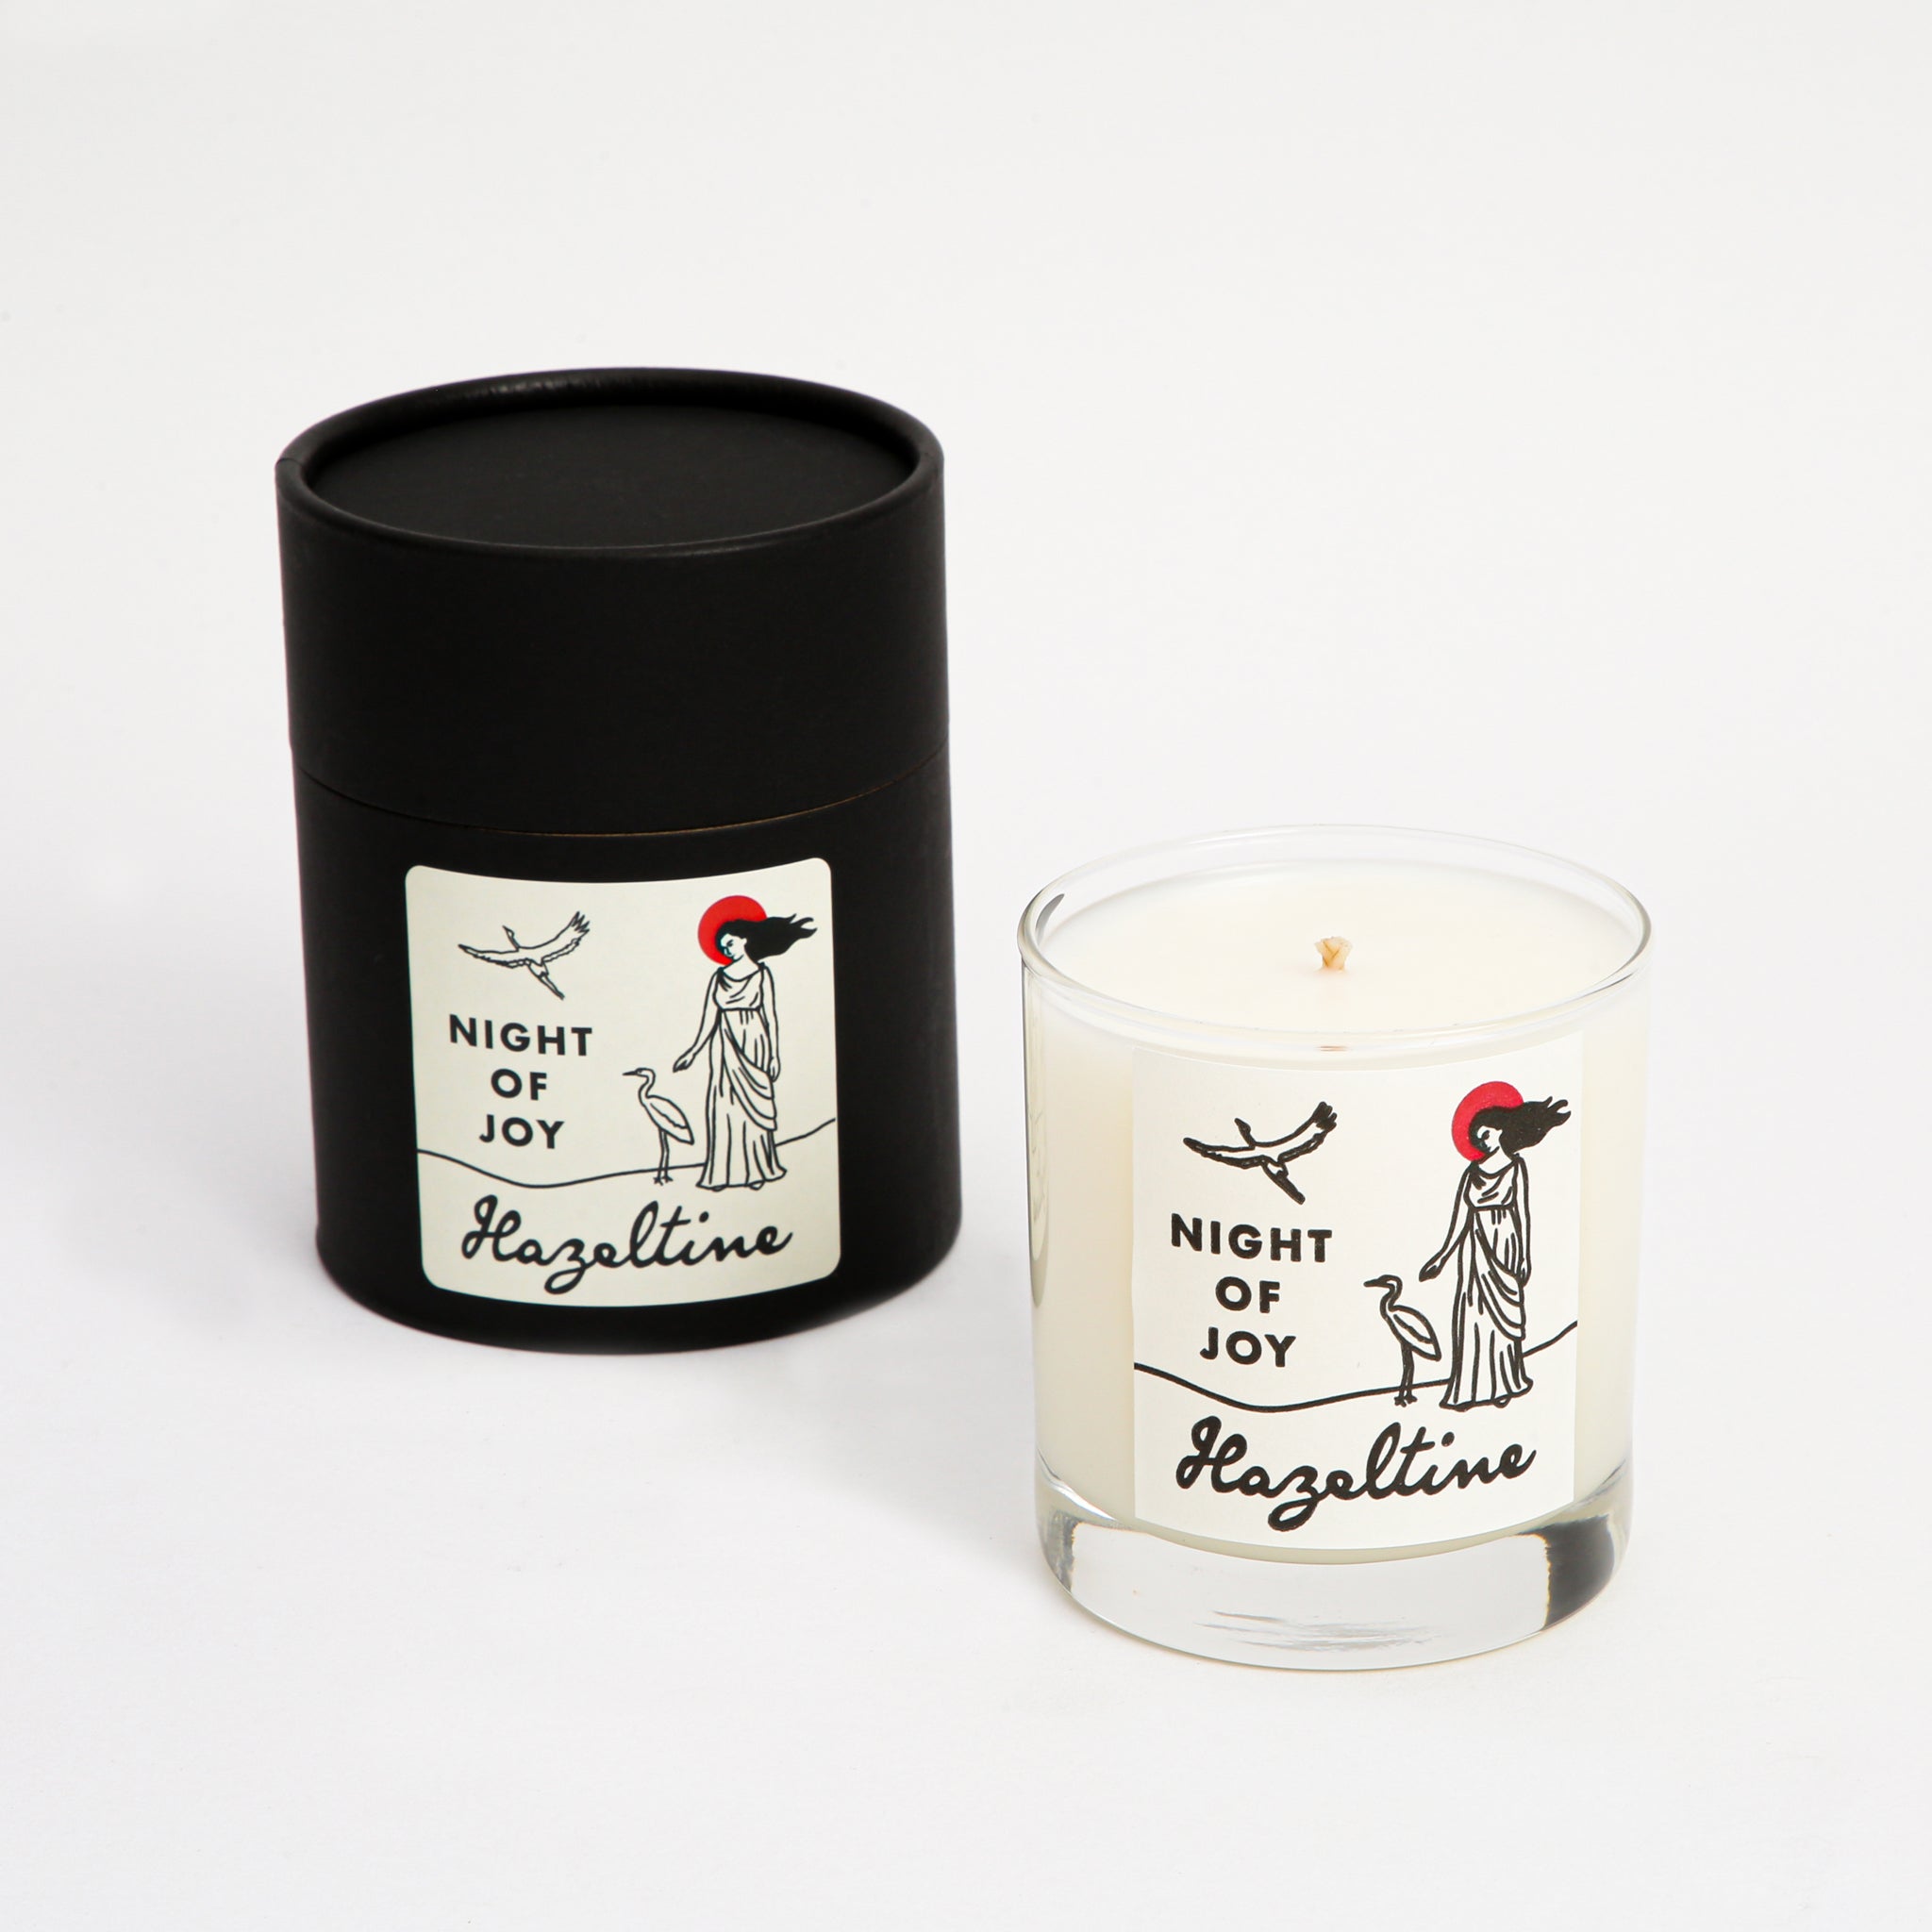 Night of Joy Scented Candle with Box